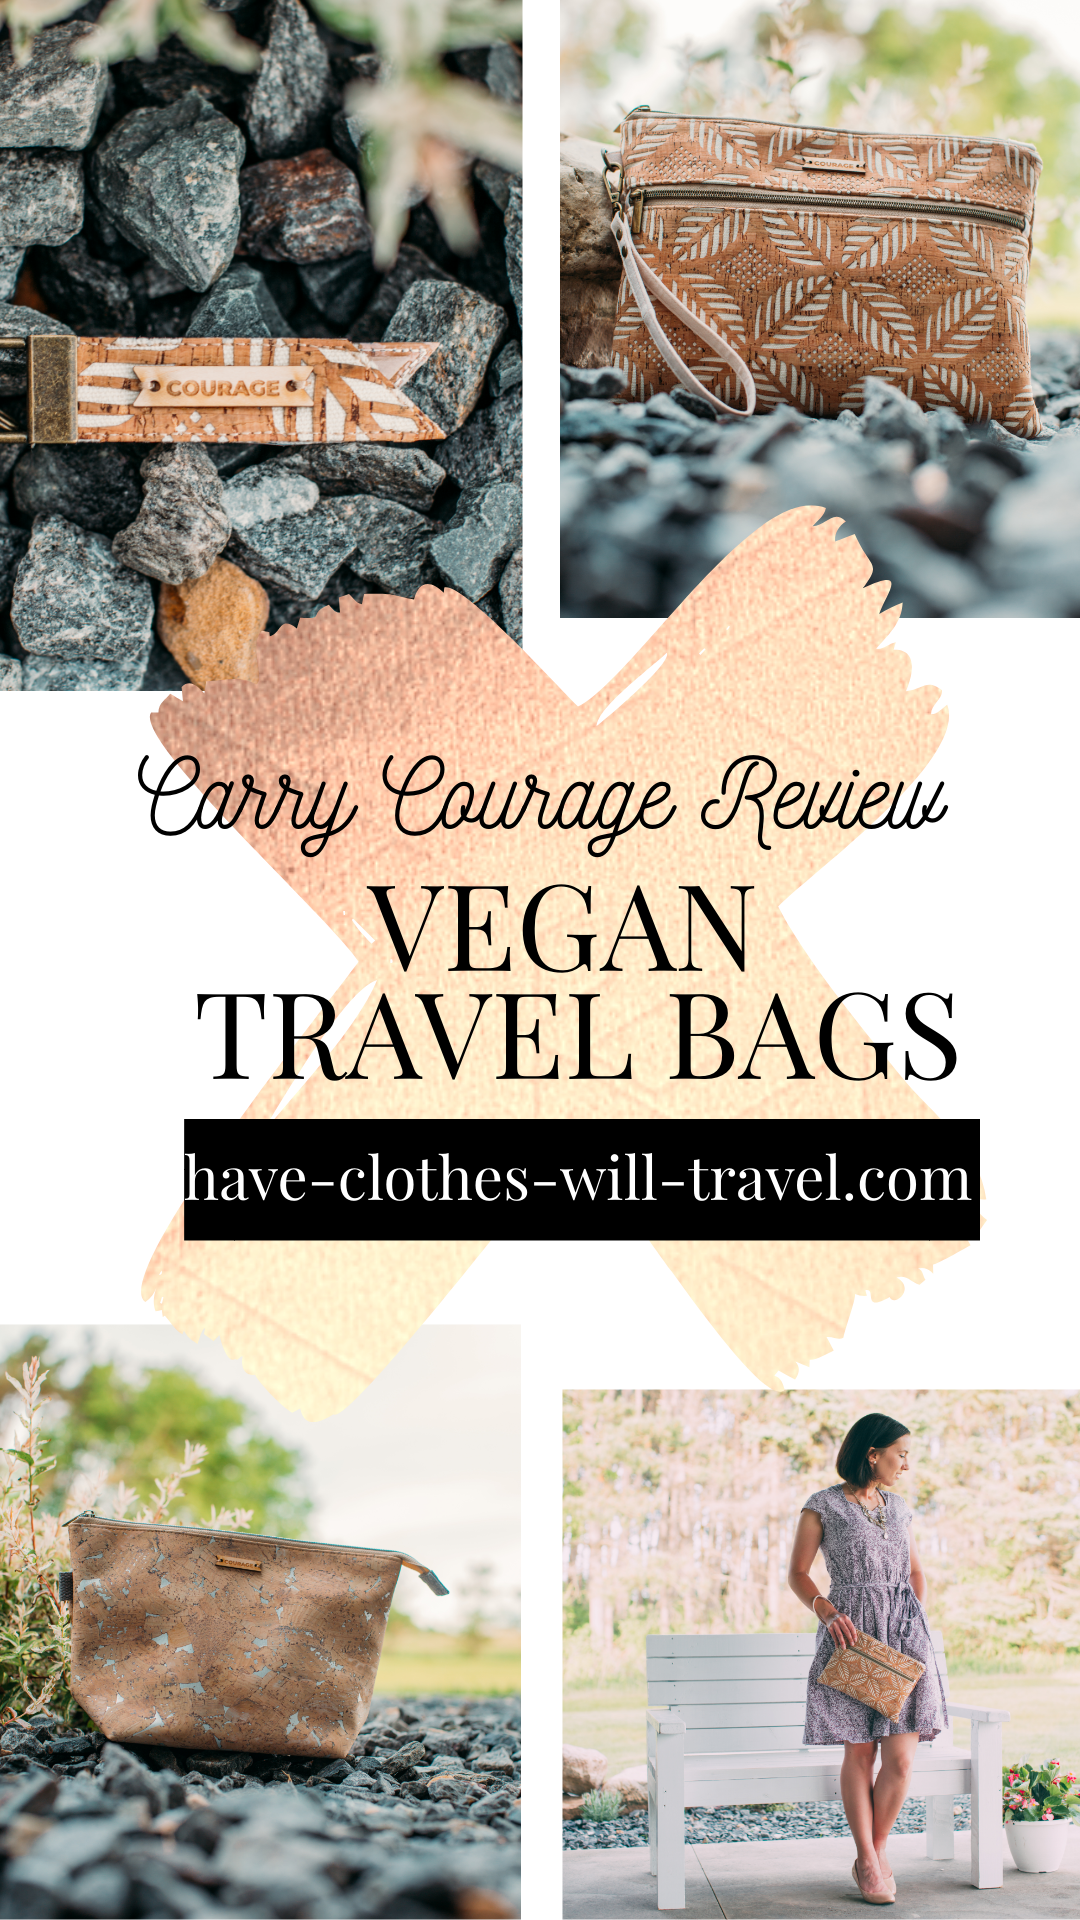 A collage of four photos featuring Carry Courage travel bags and a woman posing holding the bag. Text in the center of the image says "Carry Courage Review" and "Vegan Travel Bags"